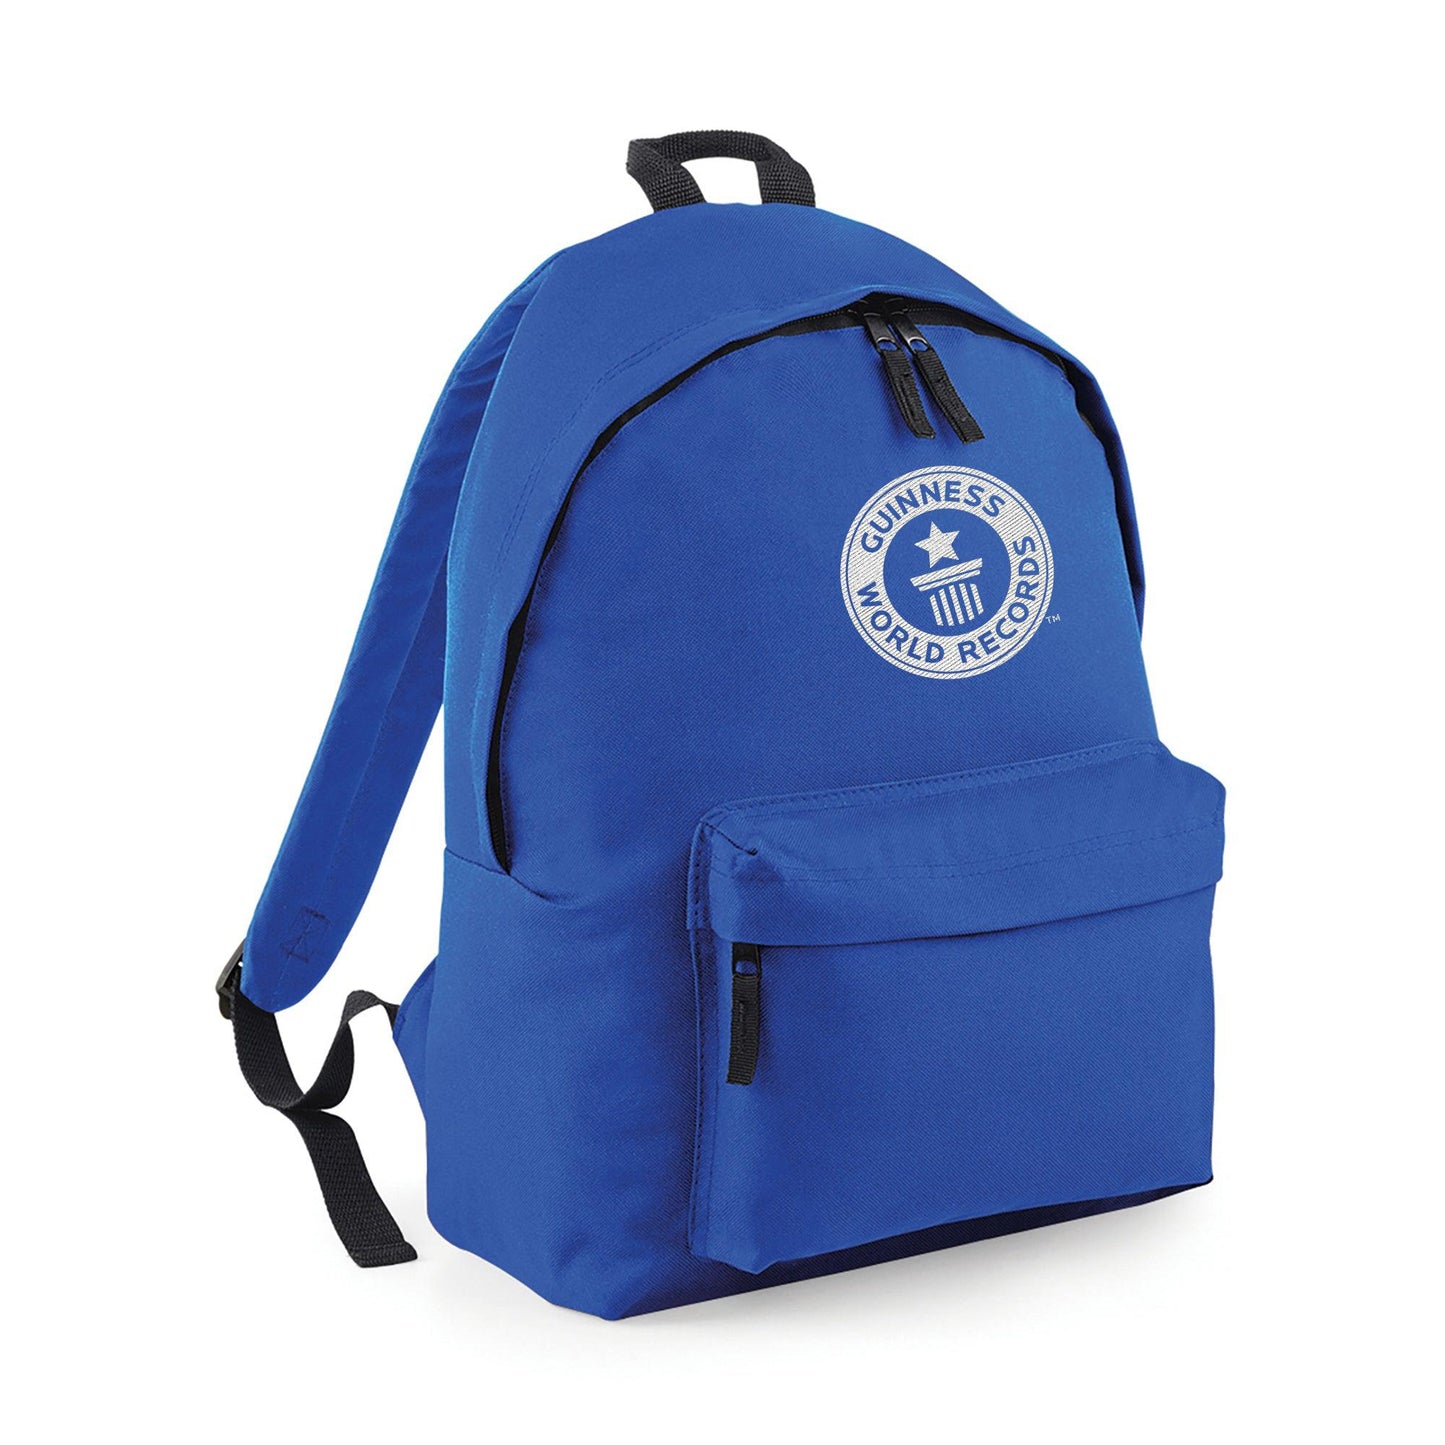 Backpack with white logo